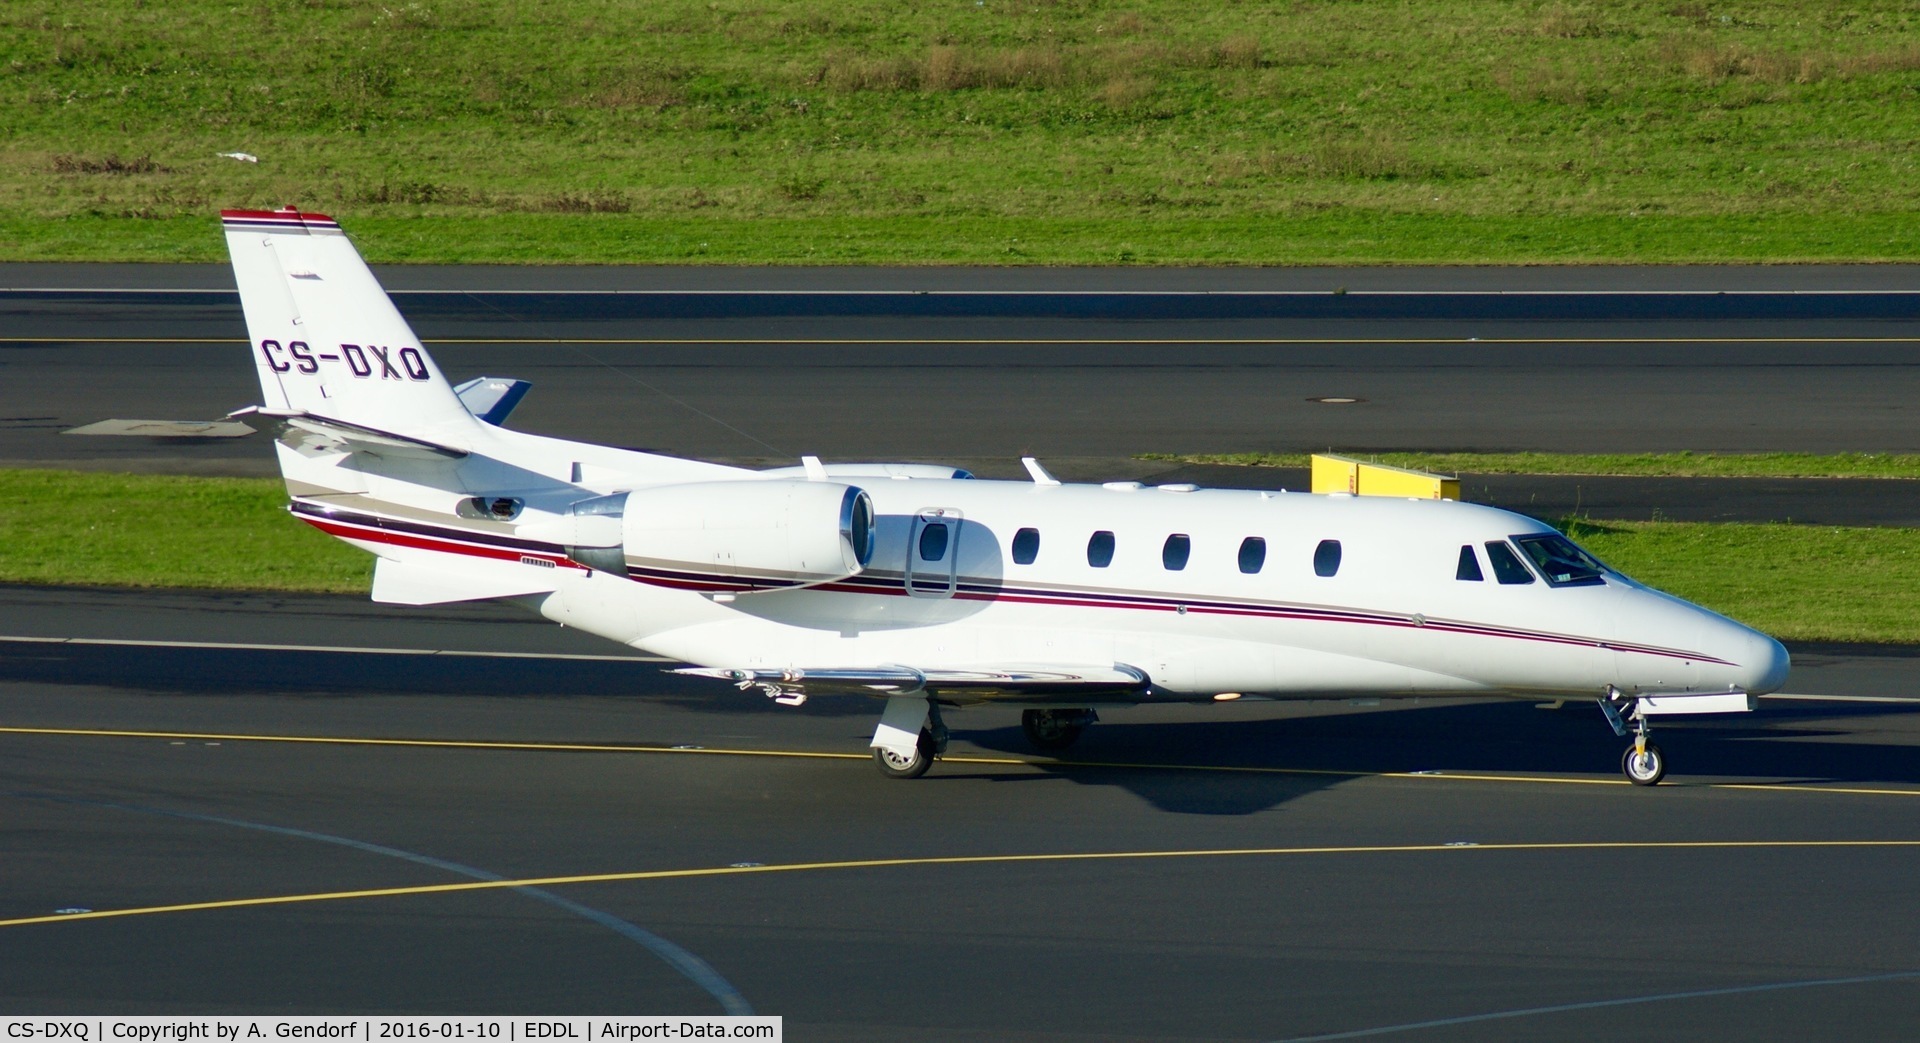 CS-DXQ, 2007 Cessna 560XL Citation XLS C/N 560-5704, Net Jets (untitled), is here on taxiway 